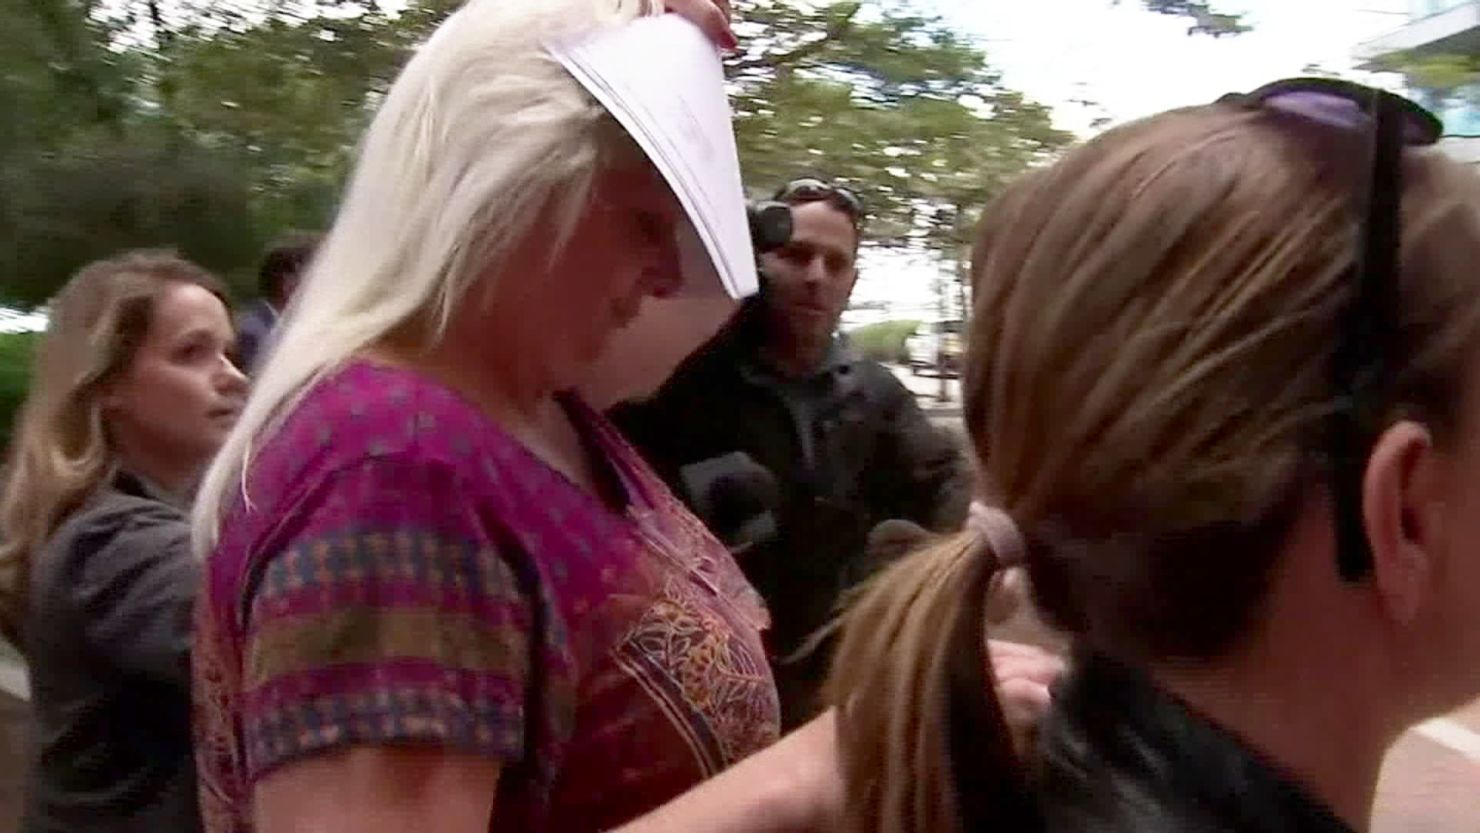 Kathleen Noftle covers her face as she walks into federal court in Boston